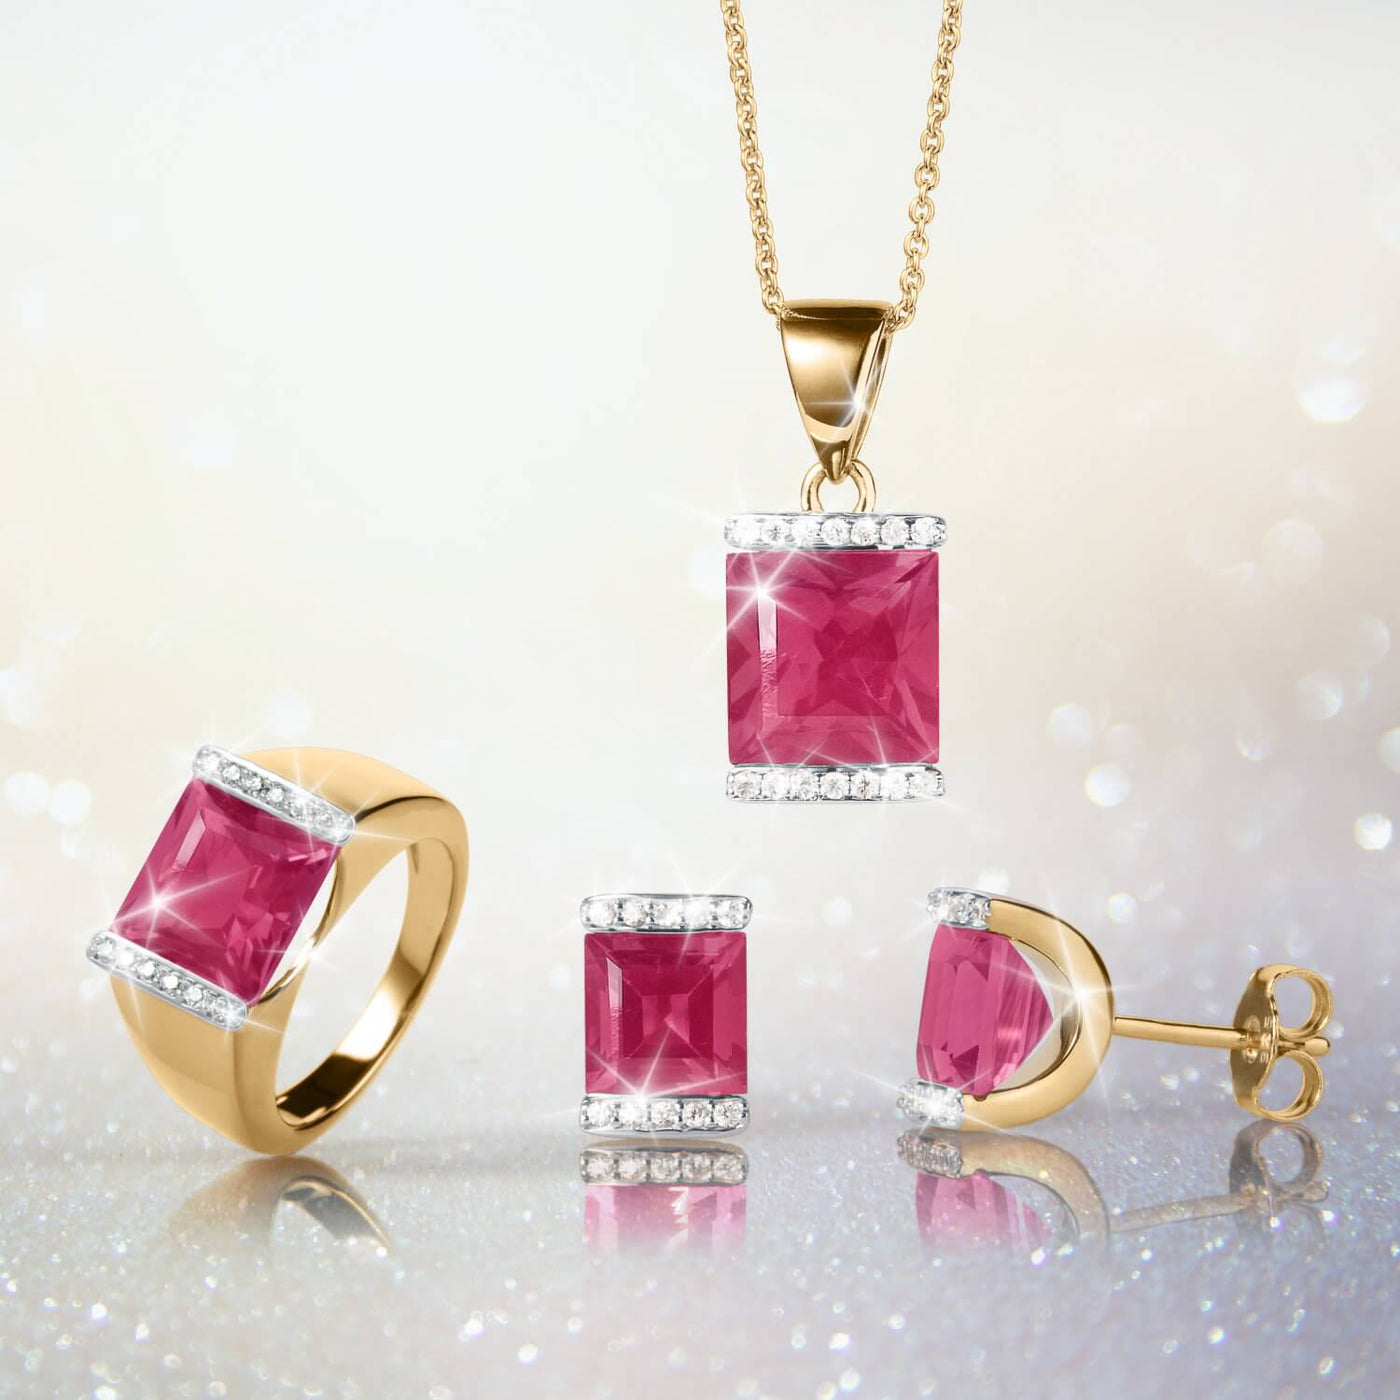 Daniel Steiger Ruby Paradise Collection